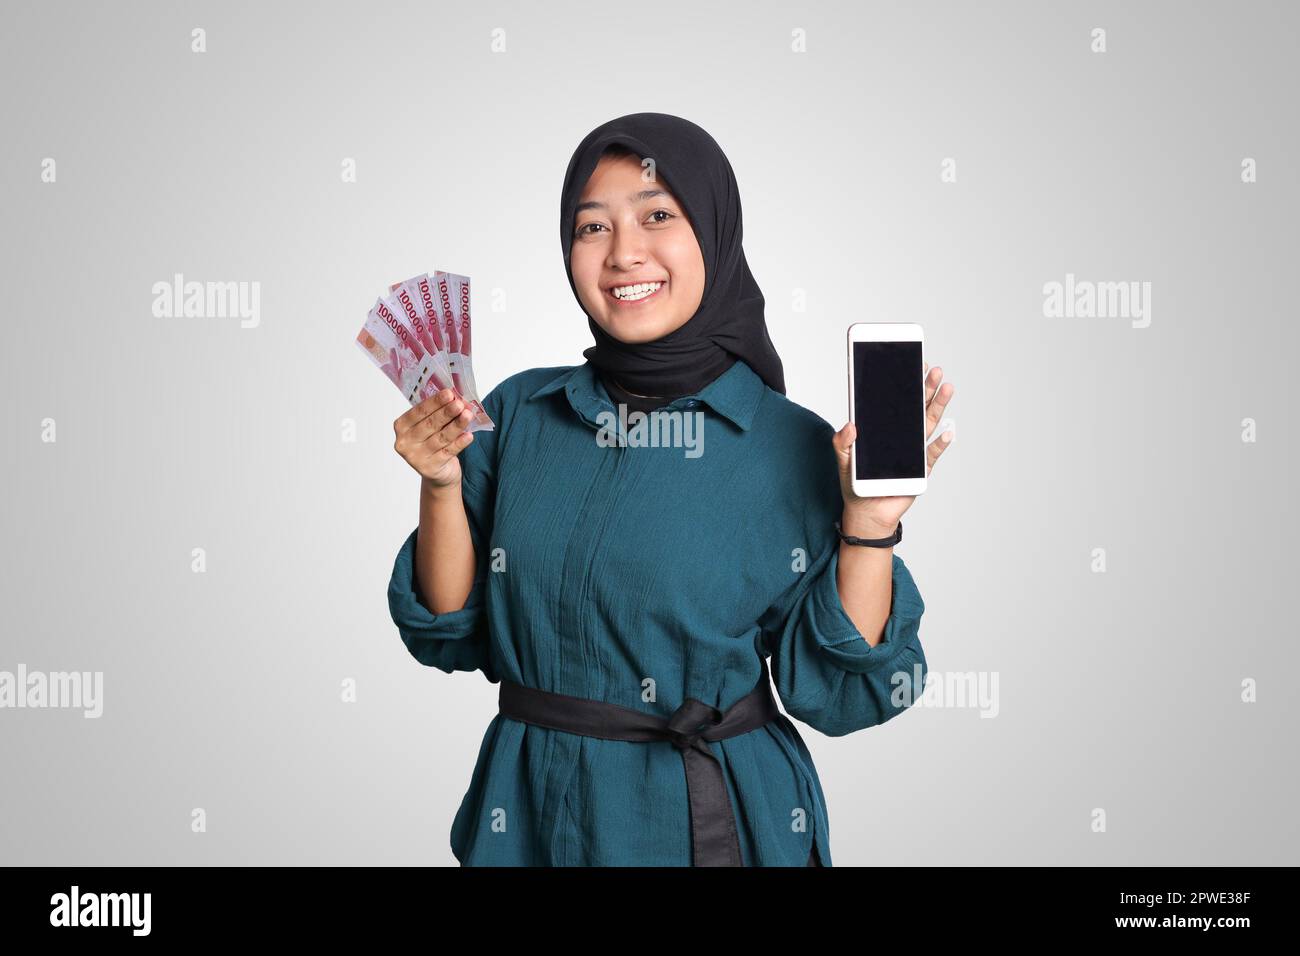 Portrait of excited Asian muslim woman with hijab, showing one hundred thousand rupiah while showing blank screen mockup mobile phone. Financial and s Stock Photo